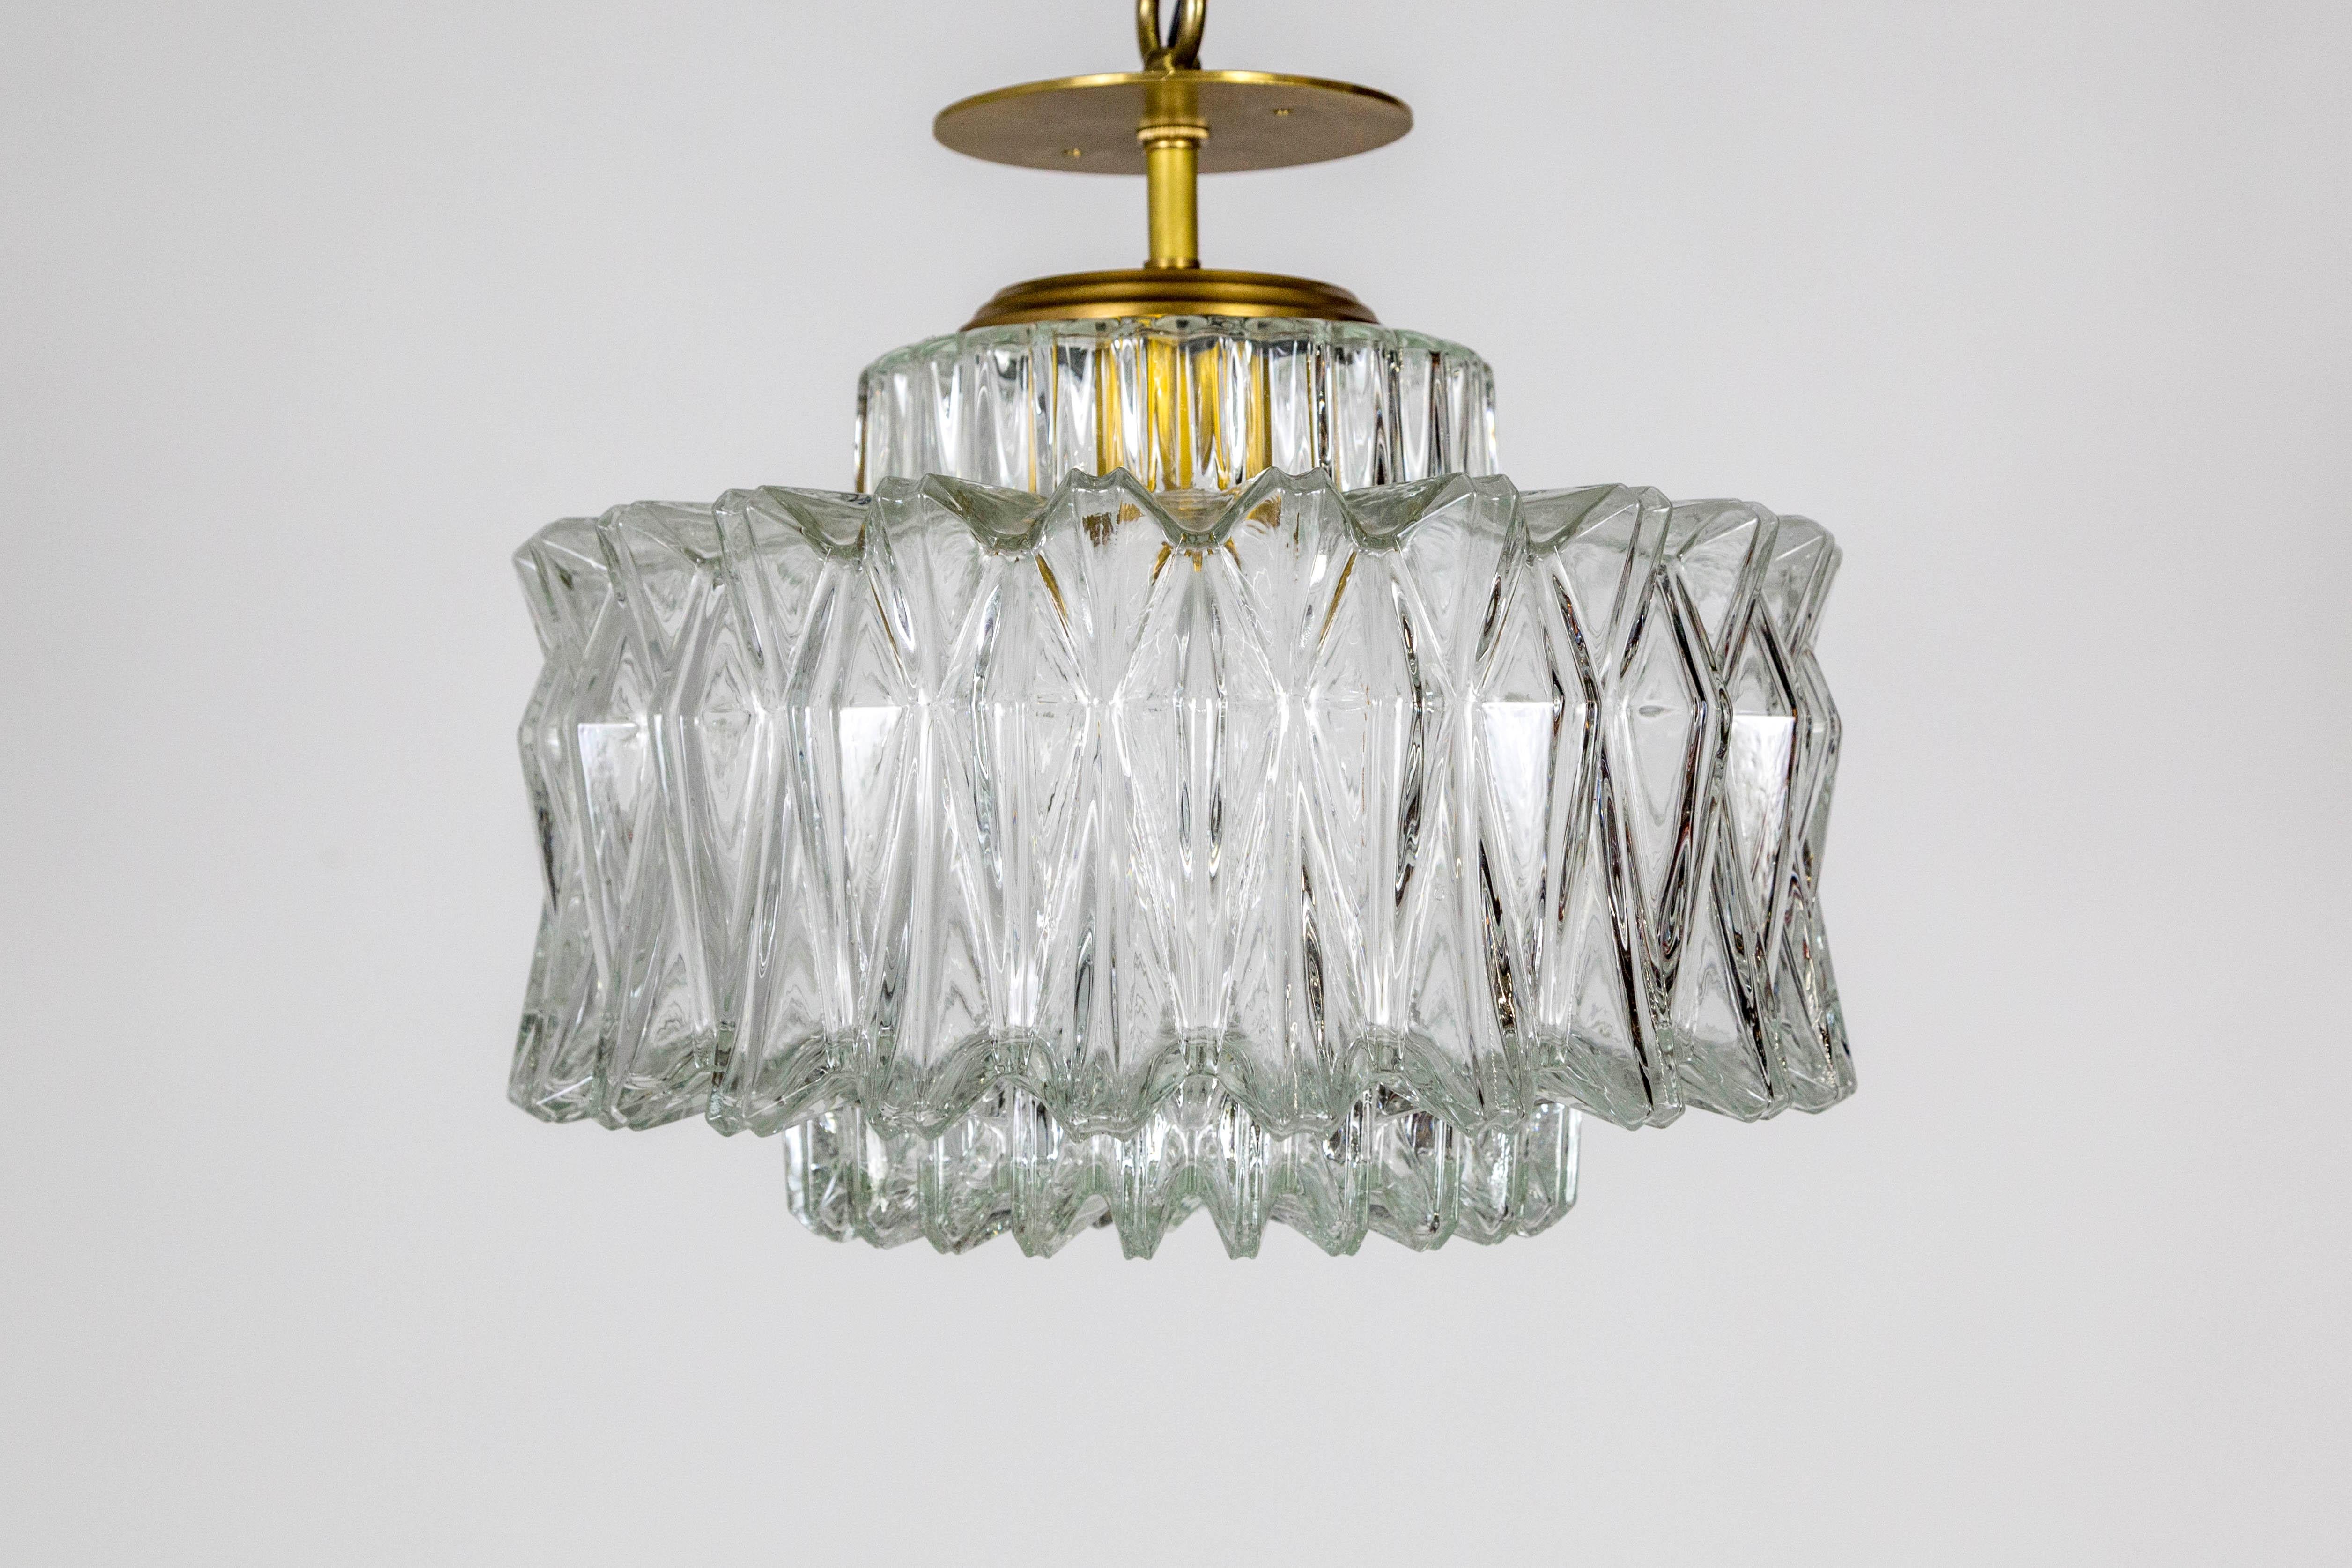 A Brutalist style, large, chunky, multifaceted, molded glass shade made by Glashutte Limberg in the 1960s. Newly fashioned into a pendant light with a short, brass stem and shade holder. Measures: 13